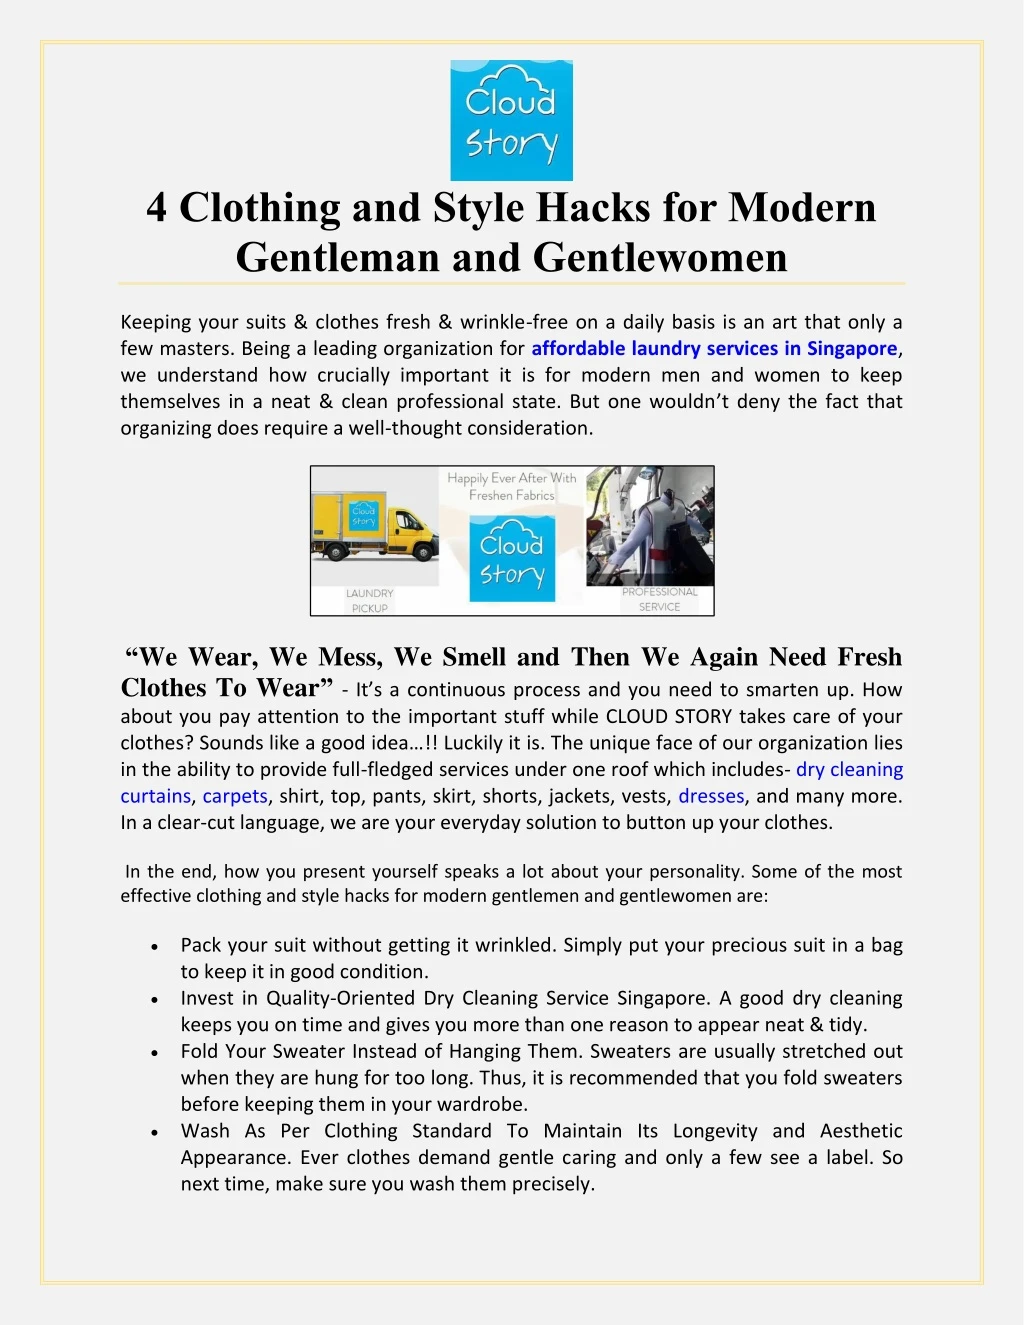 4 clothing and style hacks for modern gentleman